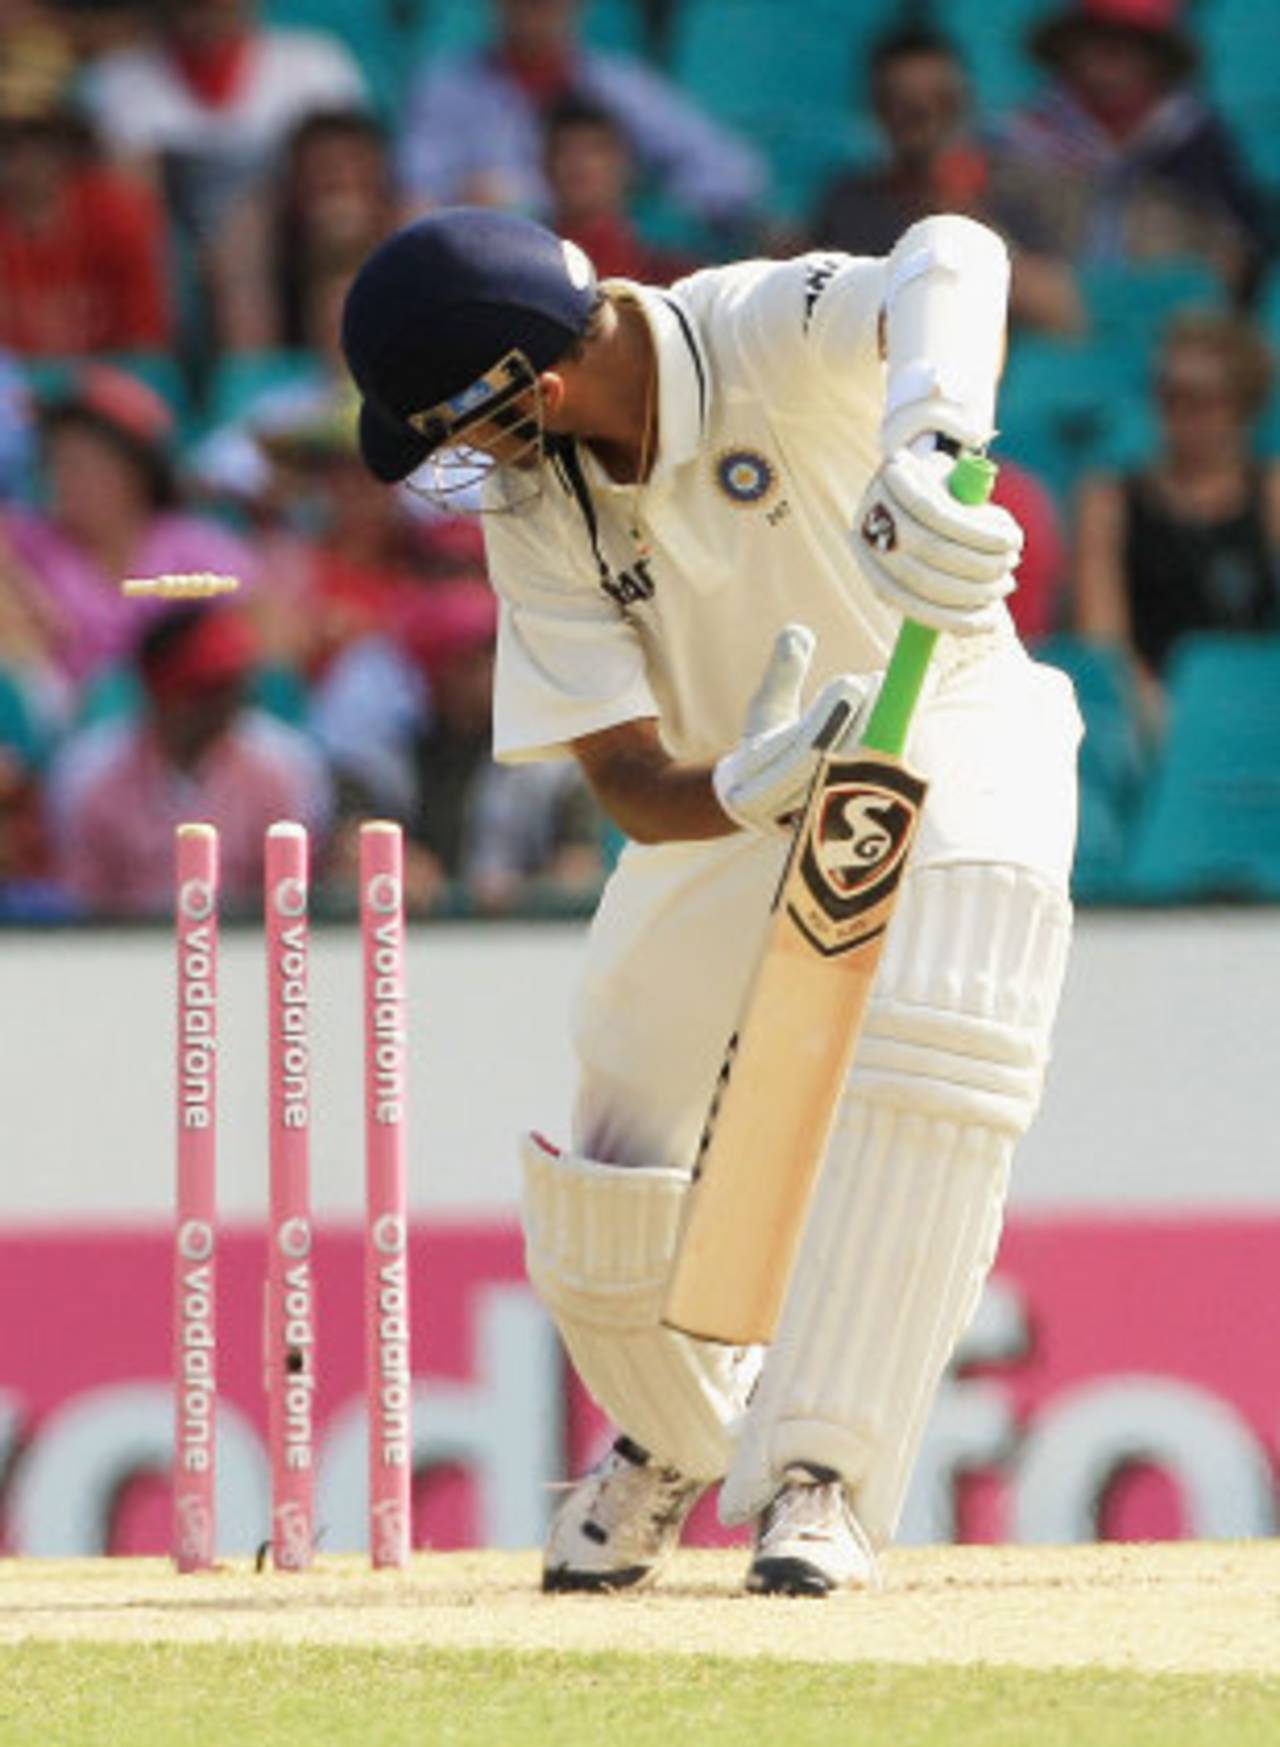 Rahul Dravid was bowled between bat and pad, again, Australia v India, 2nd Test, Sydney, 3rd day, January 5, 2012